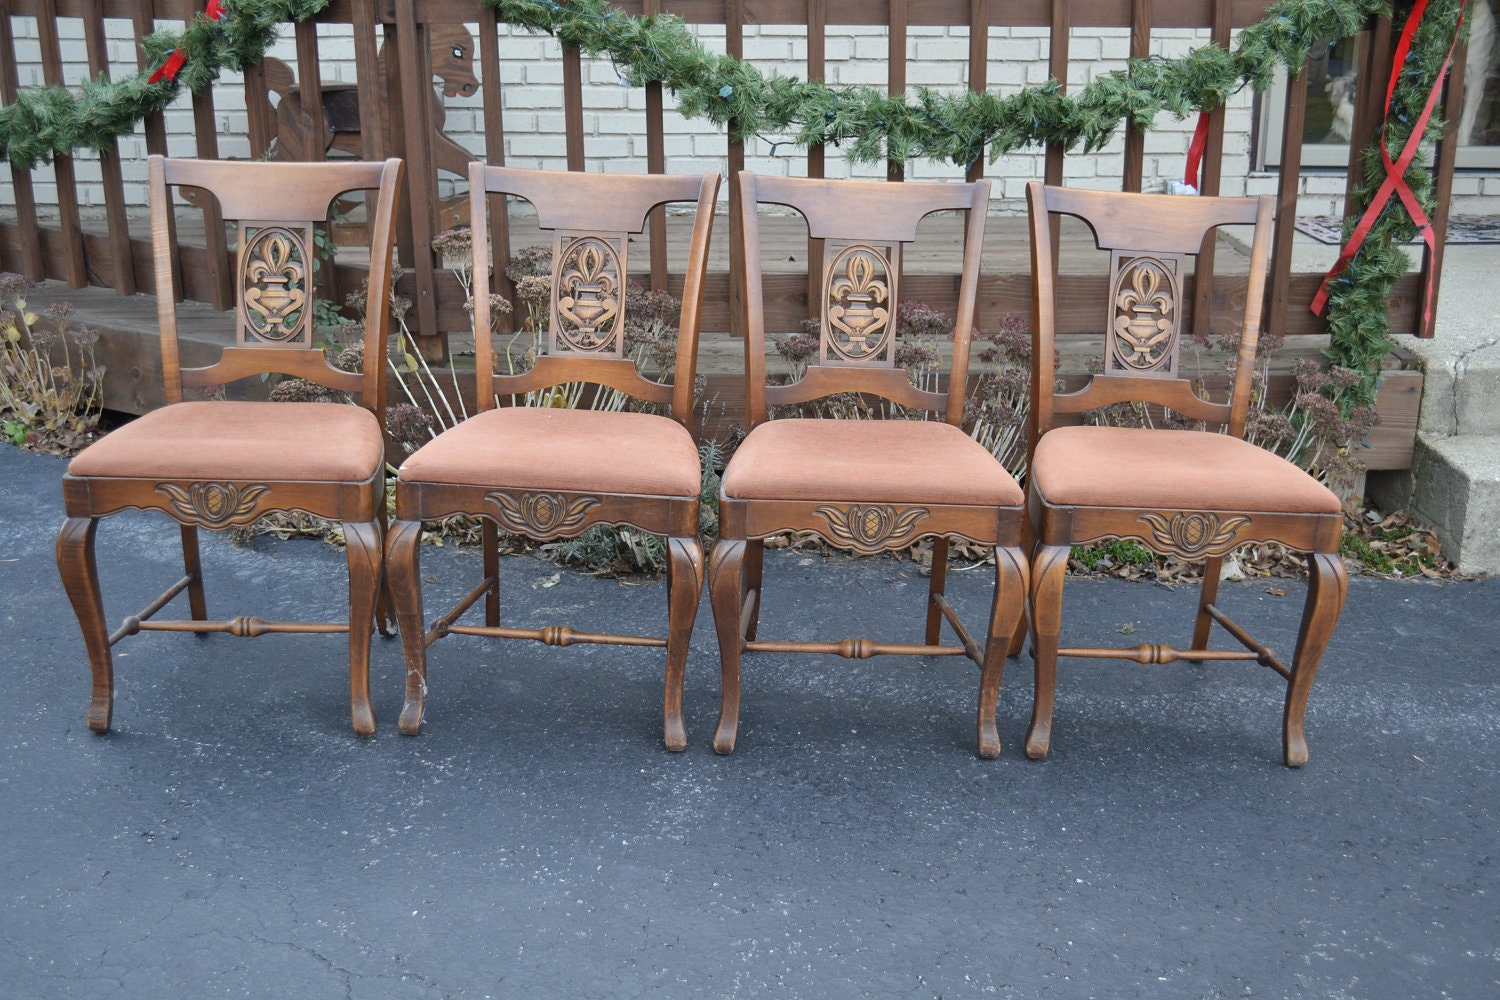 Dining Chairs - Old Hickory Rustic Log Furniture